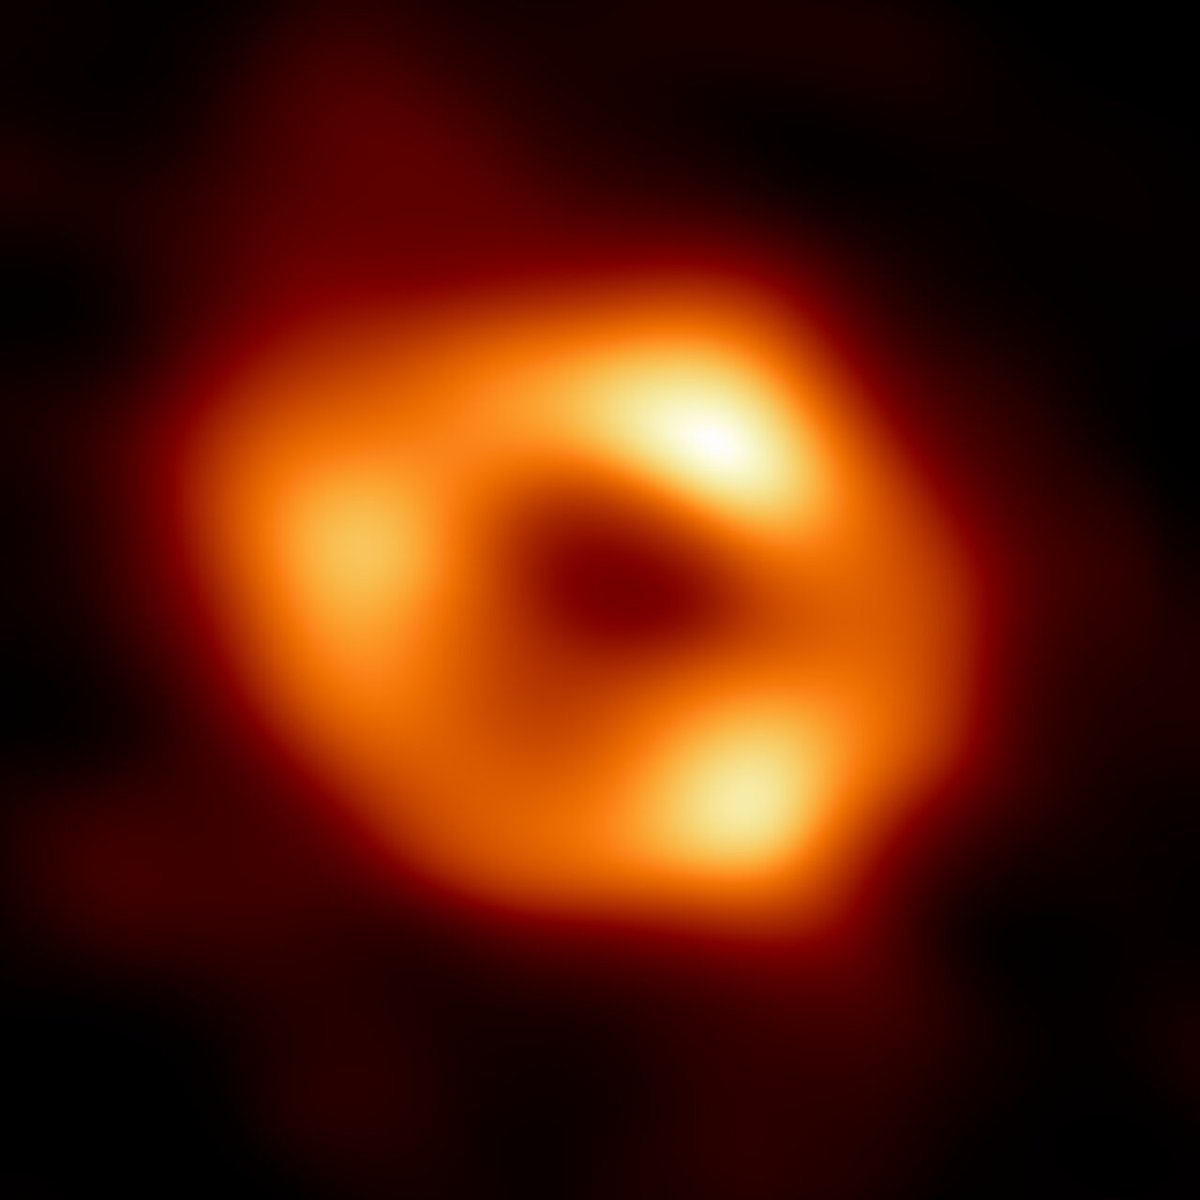 📢 Breaking news: Meet the Black Hole at the Centre of our Galaxy! Astronomers have unveiled the 1st image of the supermassive black hole at the centre of the Milky Way. The image was produced by a global research team @ehtelescope 📷EHT Collaboration